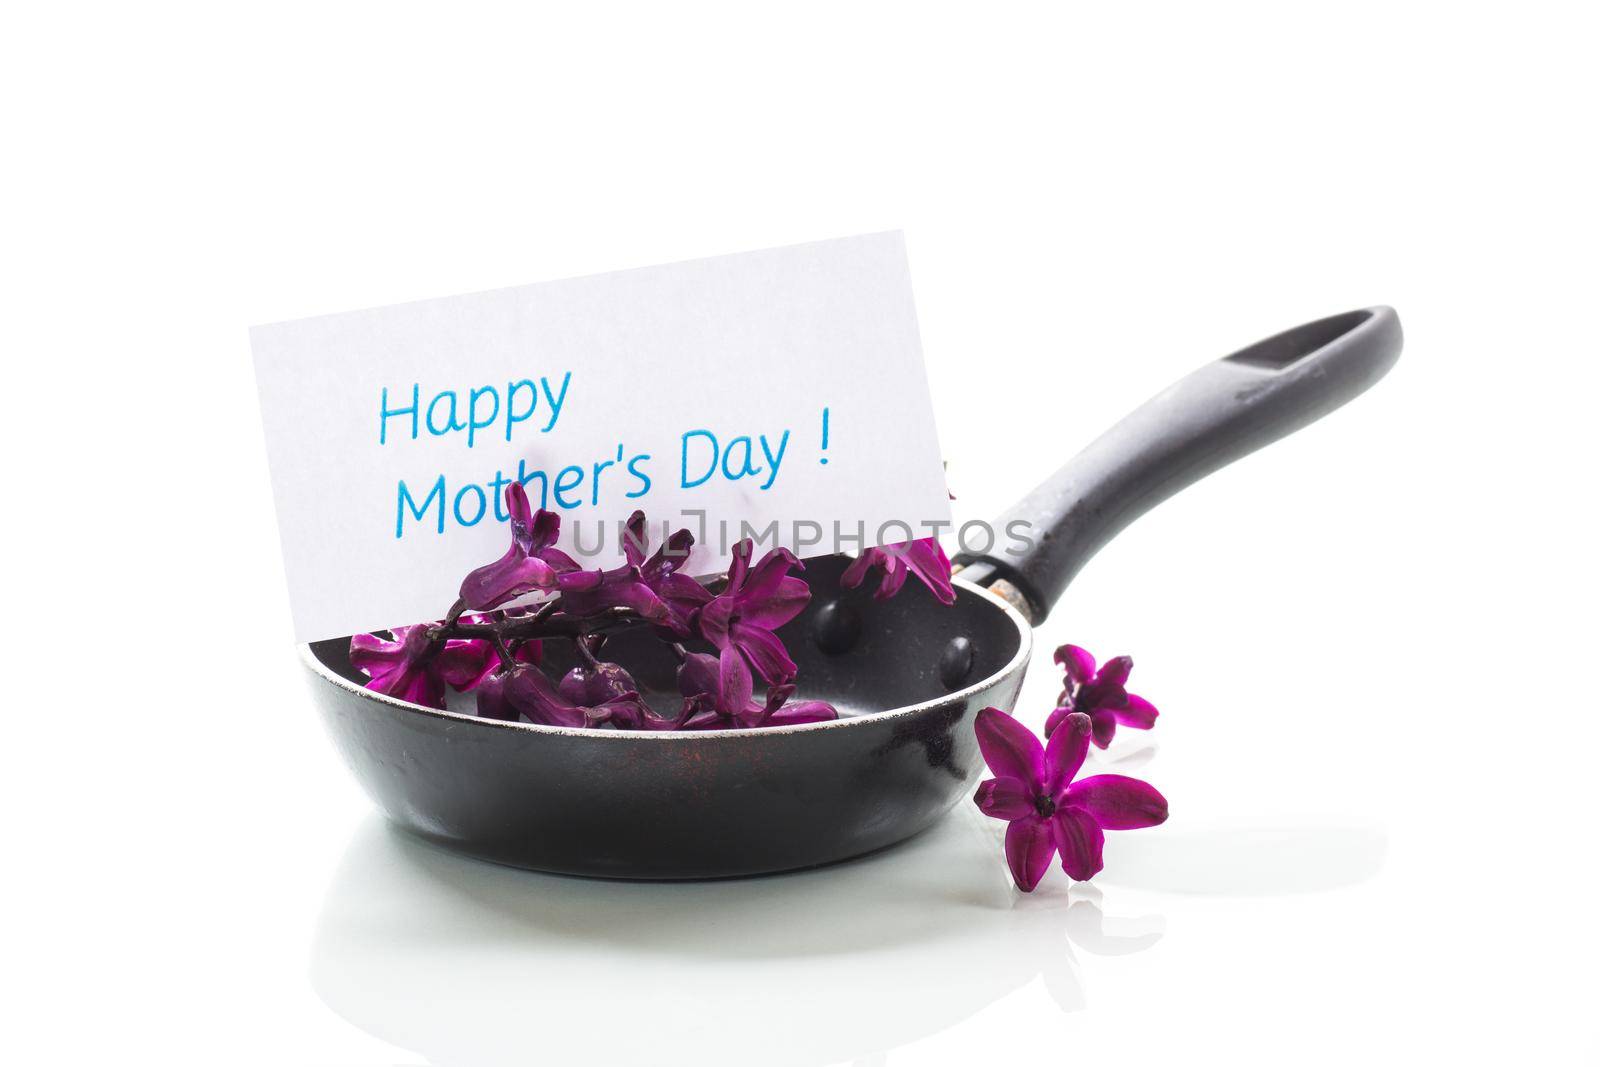 beautiful bouquet of spring flowers with congratulations for mother on white background